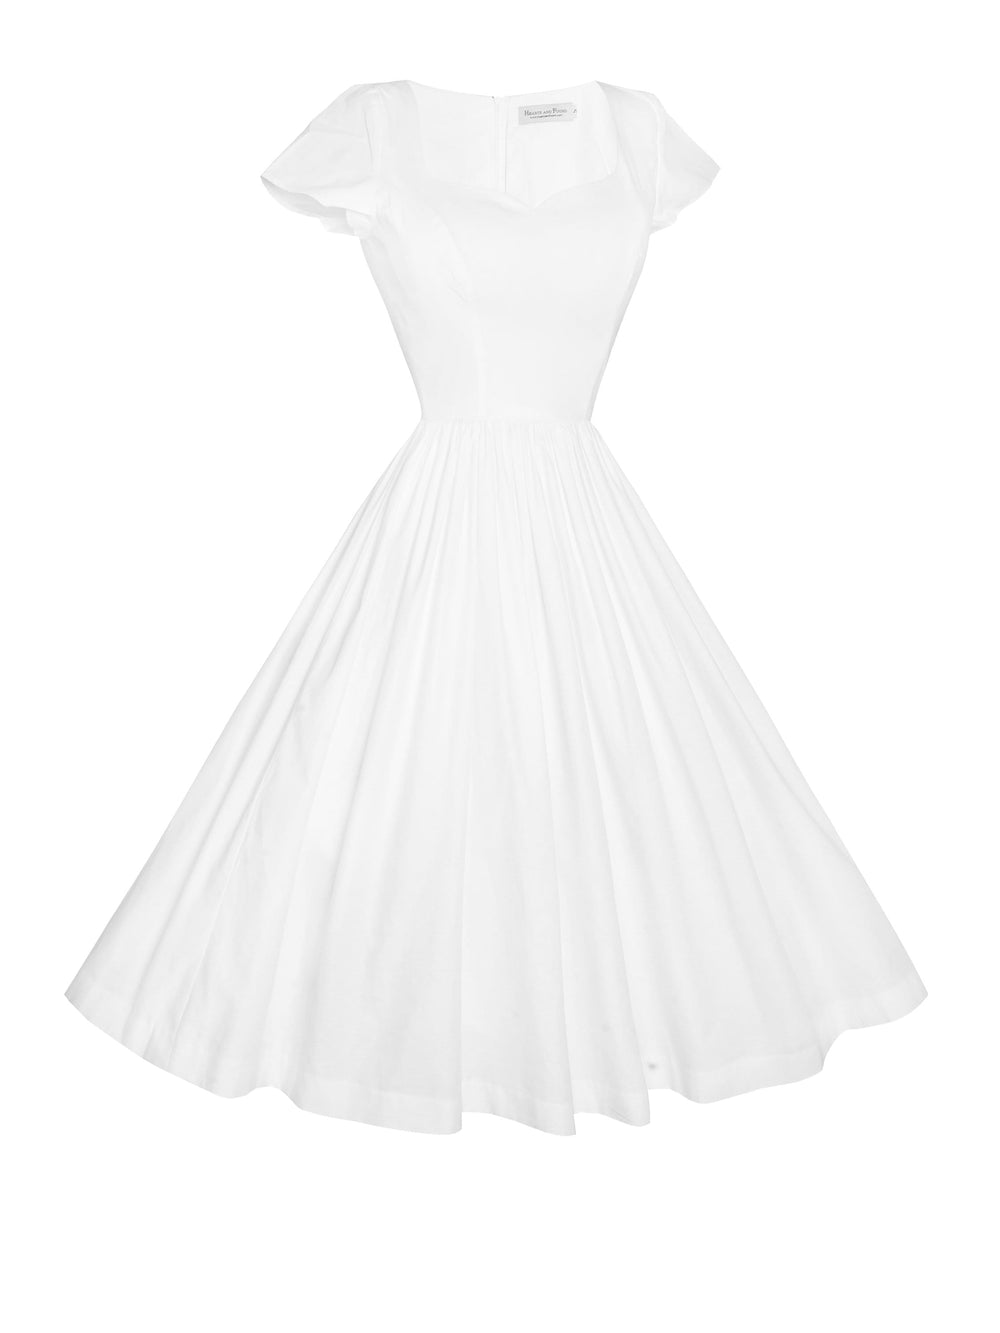 RTS - Size S - Evelyn Dress in White Cotton